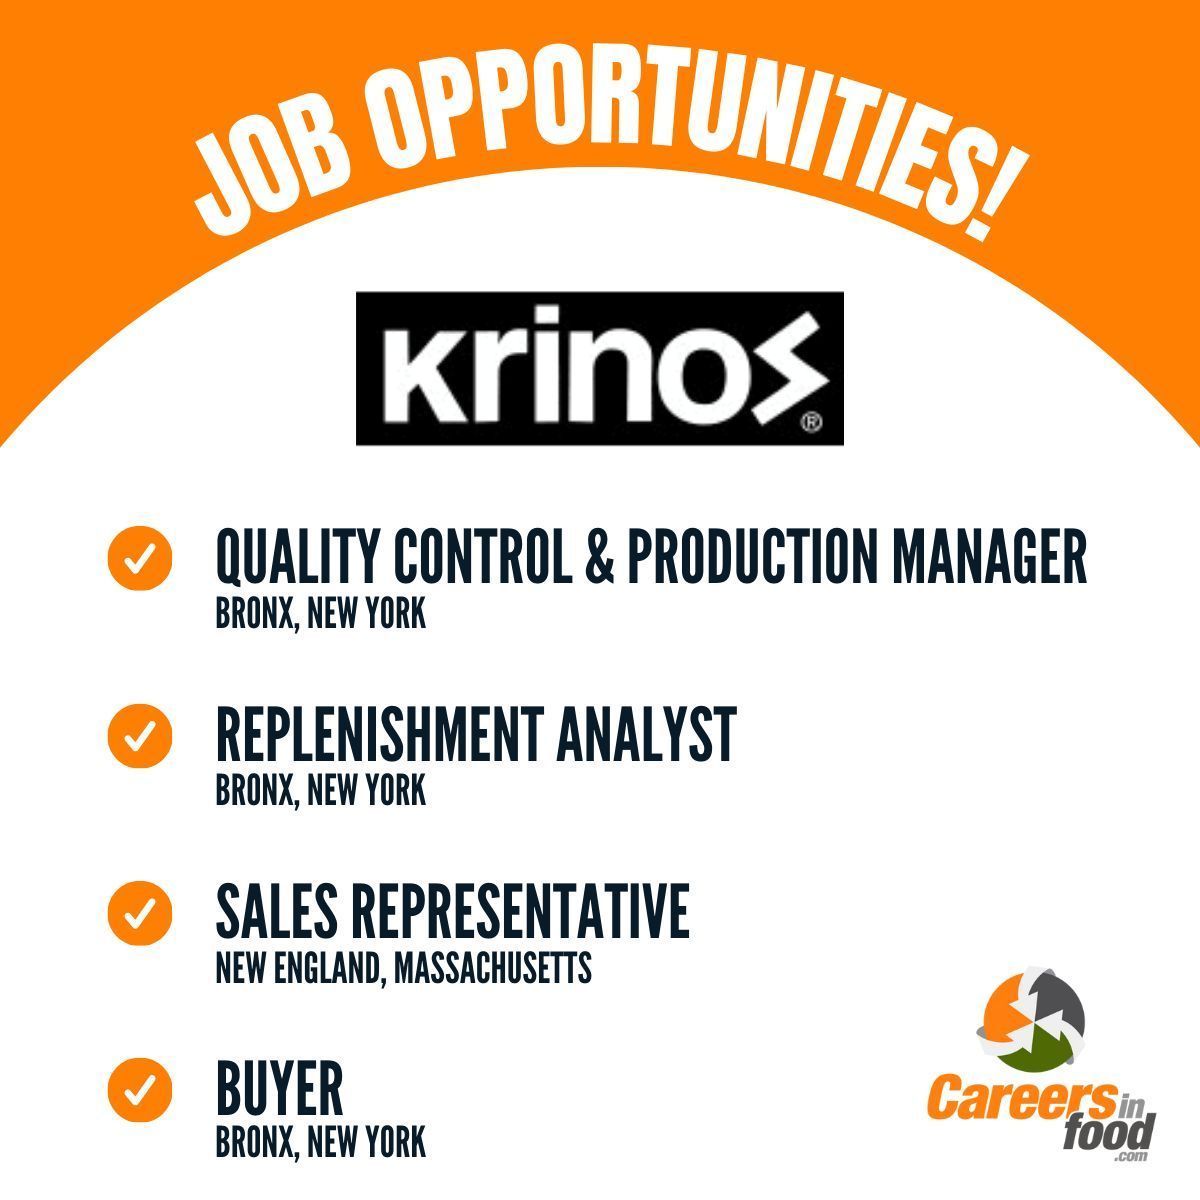 Explore job opportunities at Krinos Foods LLC!

Join as a Quality Control & Production Manager, Replenishment Analyst, Sales Representative, or a Buyer.

Apply now: careersinfood.com/krinos-foods-l… 

#JobOpportunites #QualityAssurance #SalesJobs #Jobs #Hiring #ApplyNow #FoodJobs